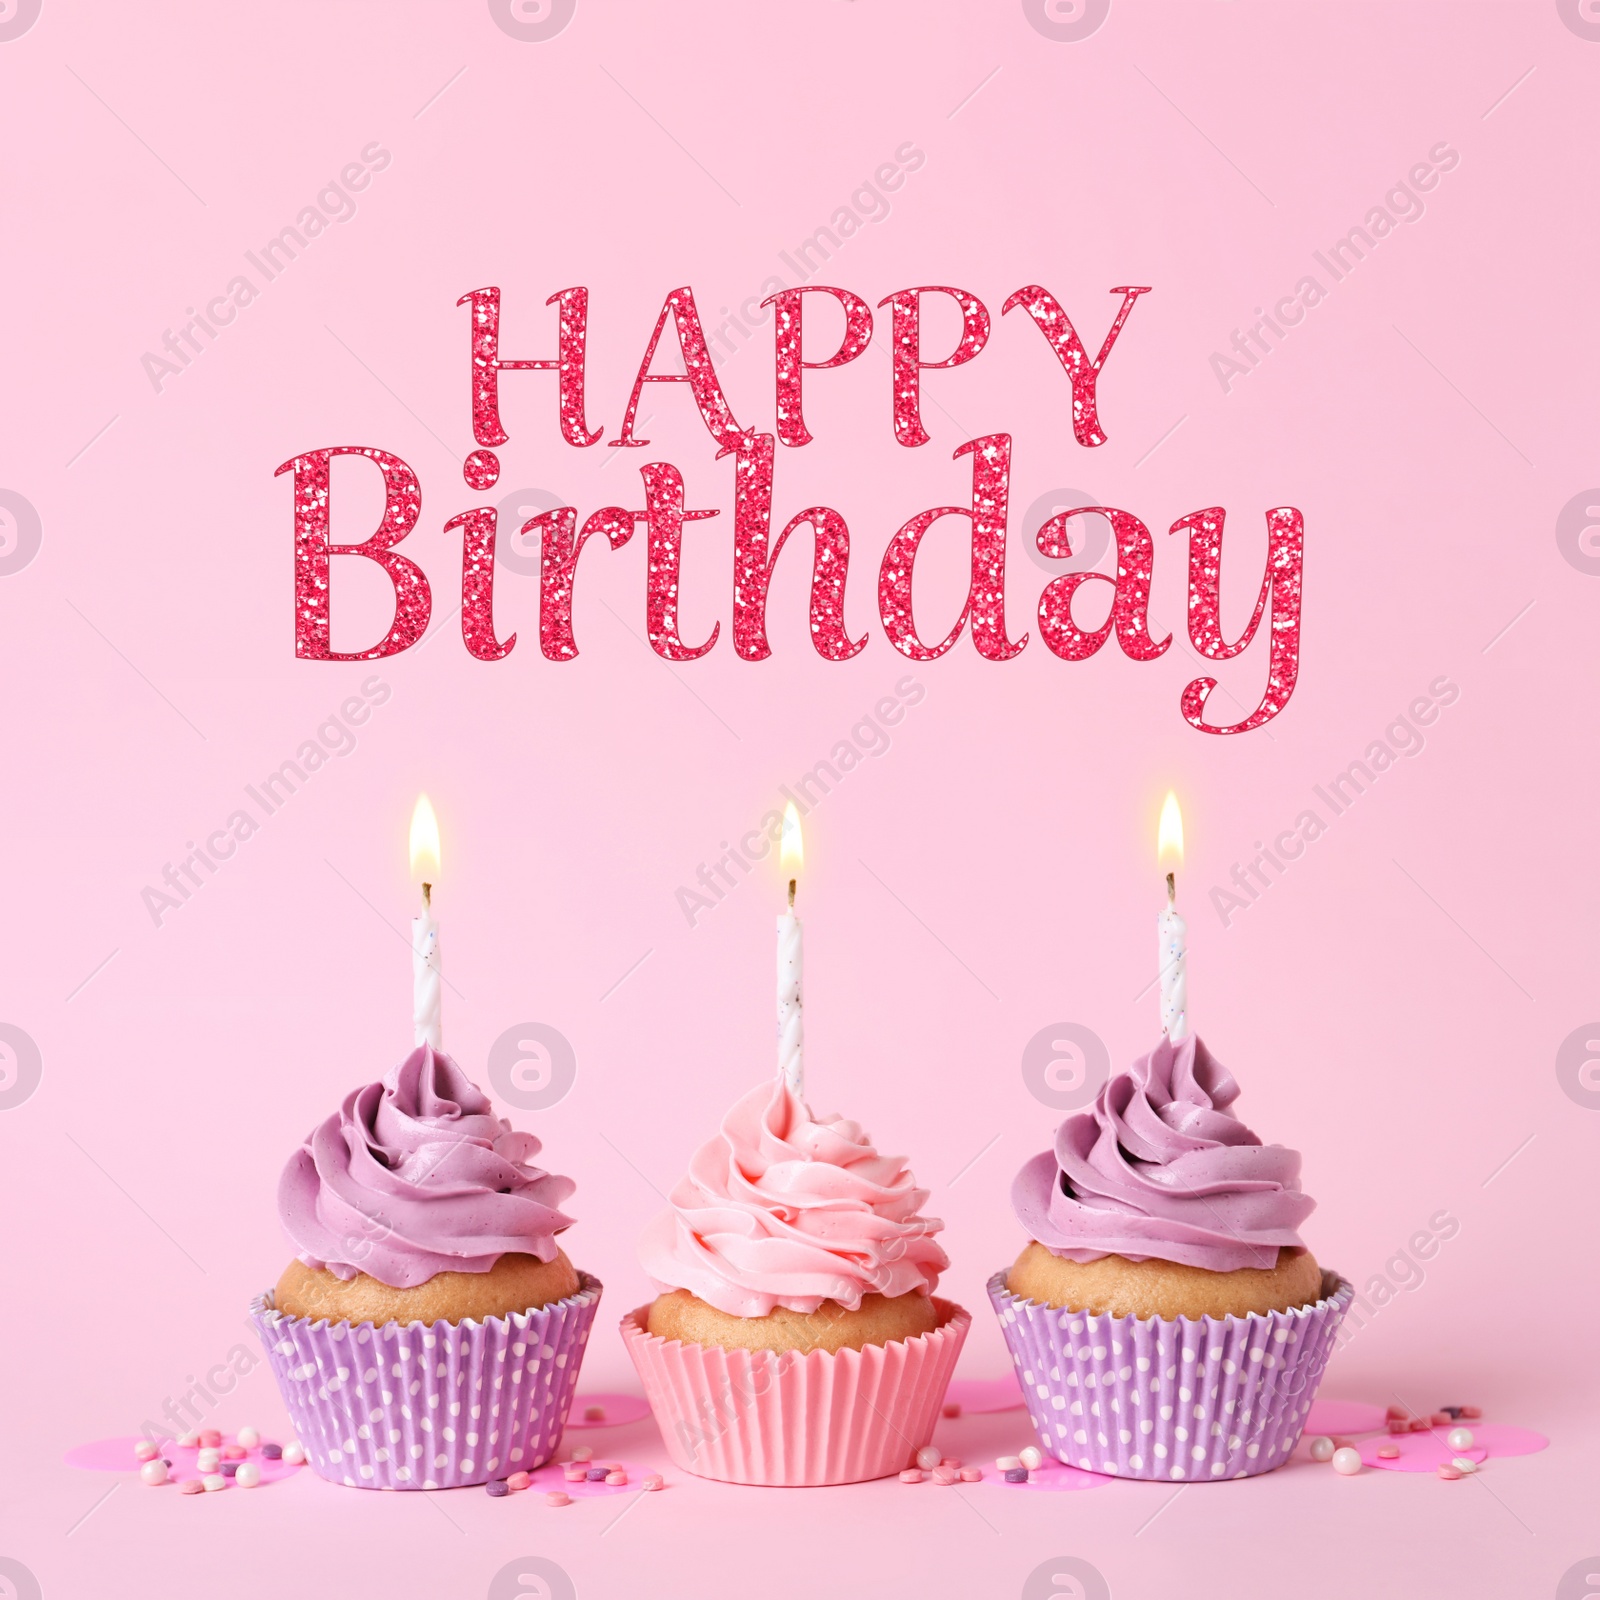 Image of Happy Birthday. Delicious cupcakes with burning candles and sprinkles on pink background